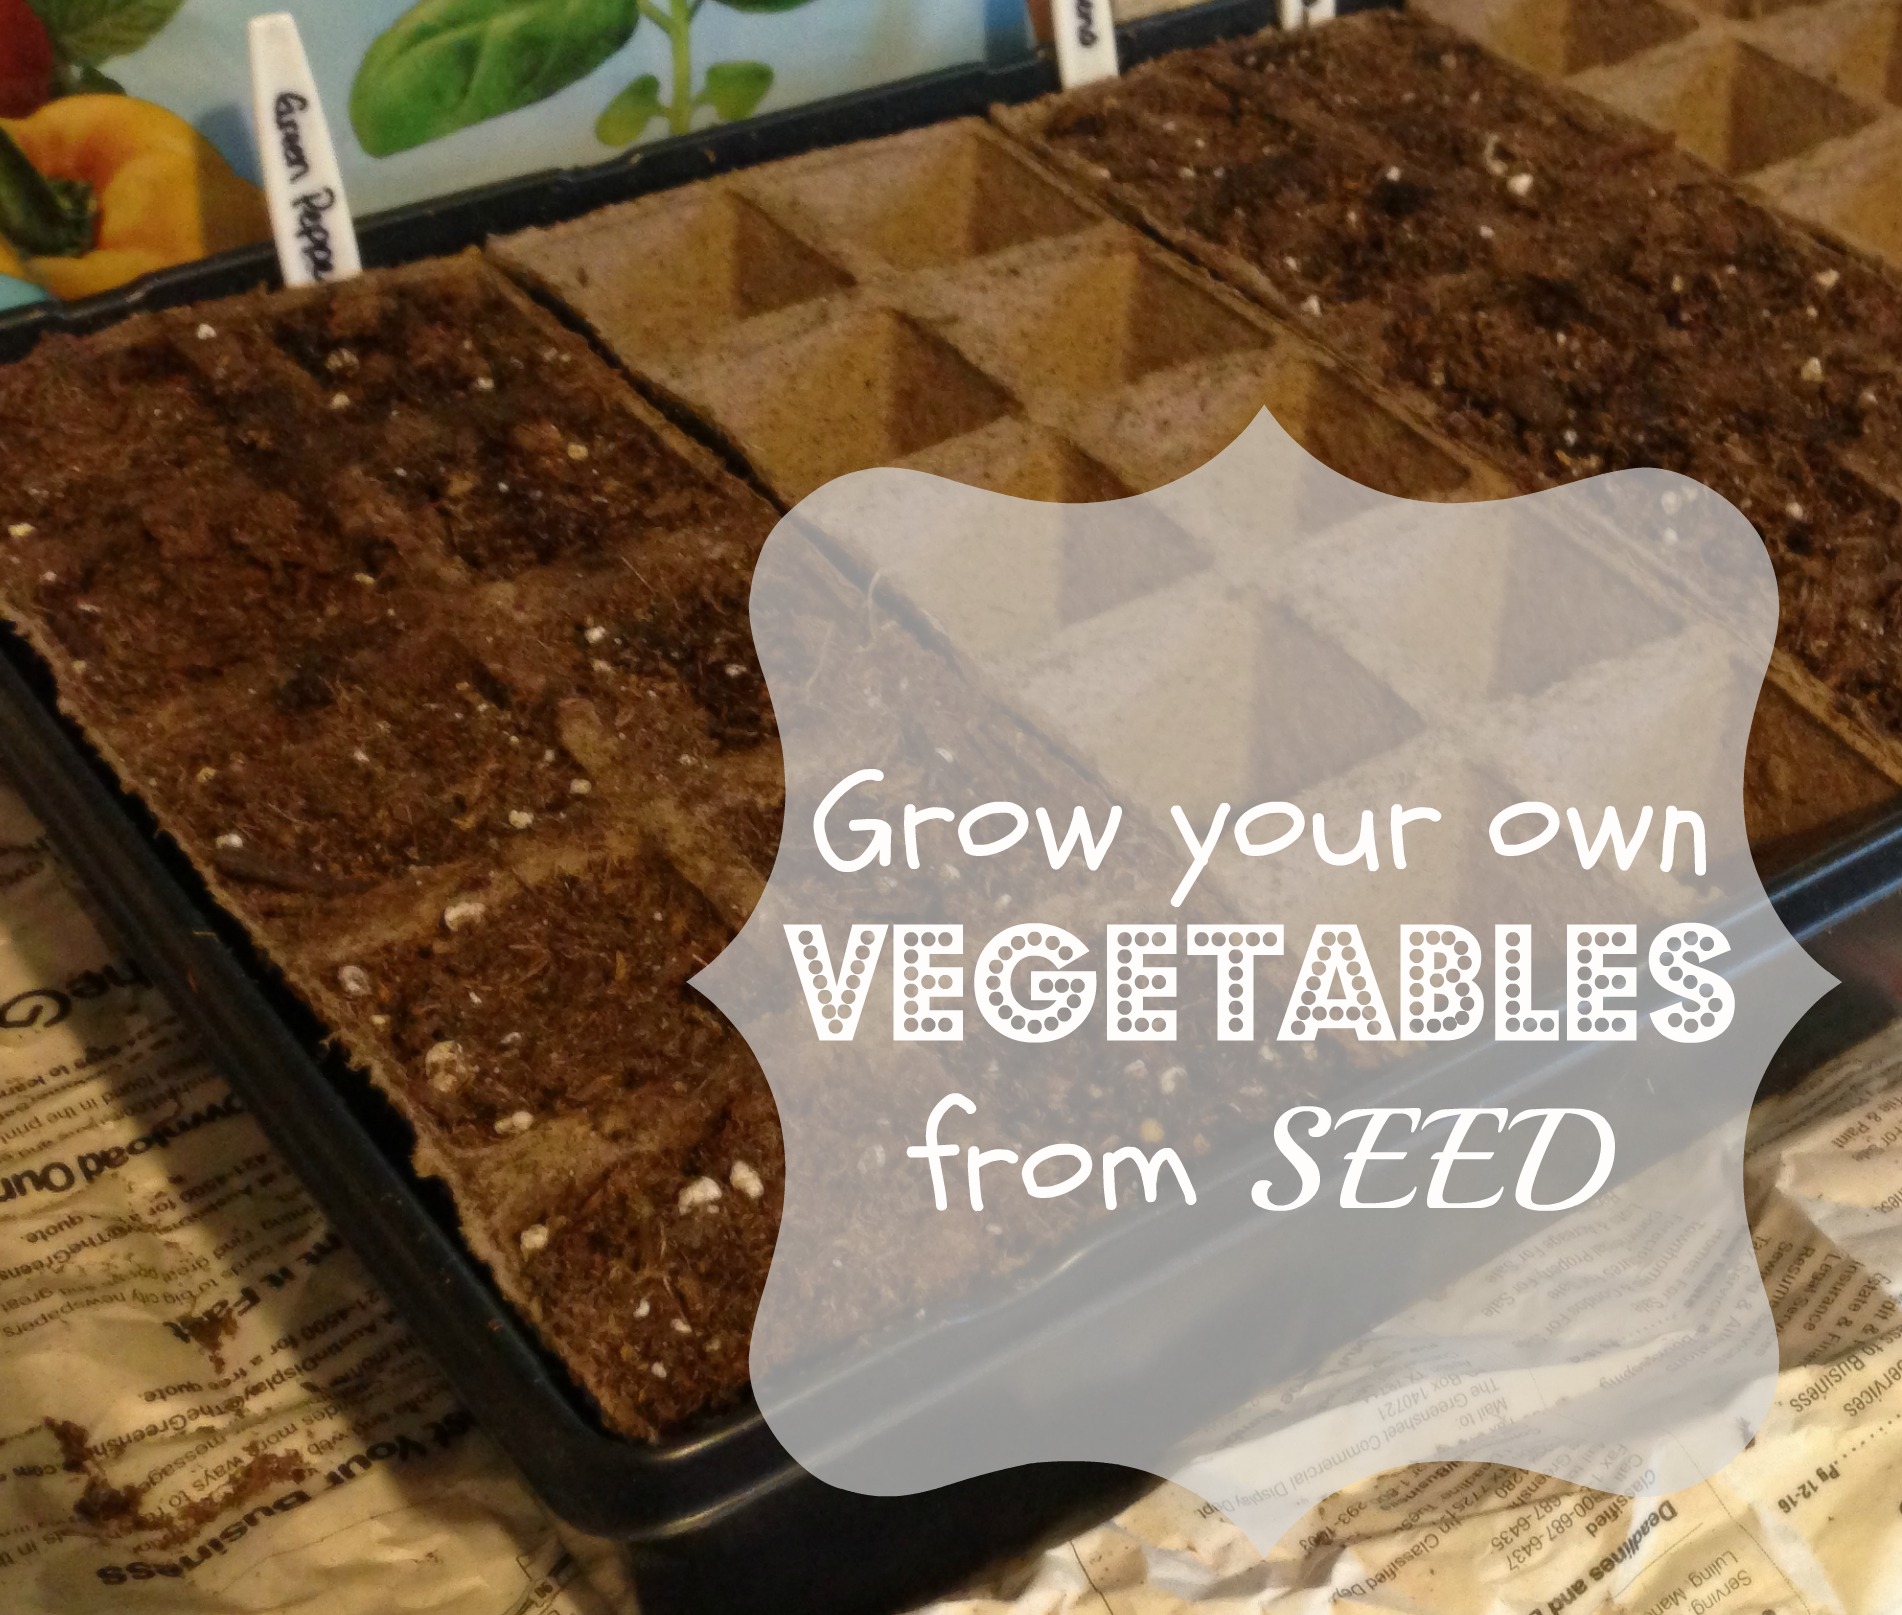 How to Grow Vegetables from Seed